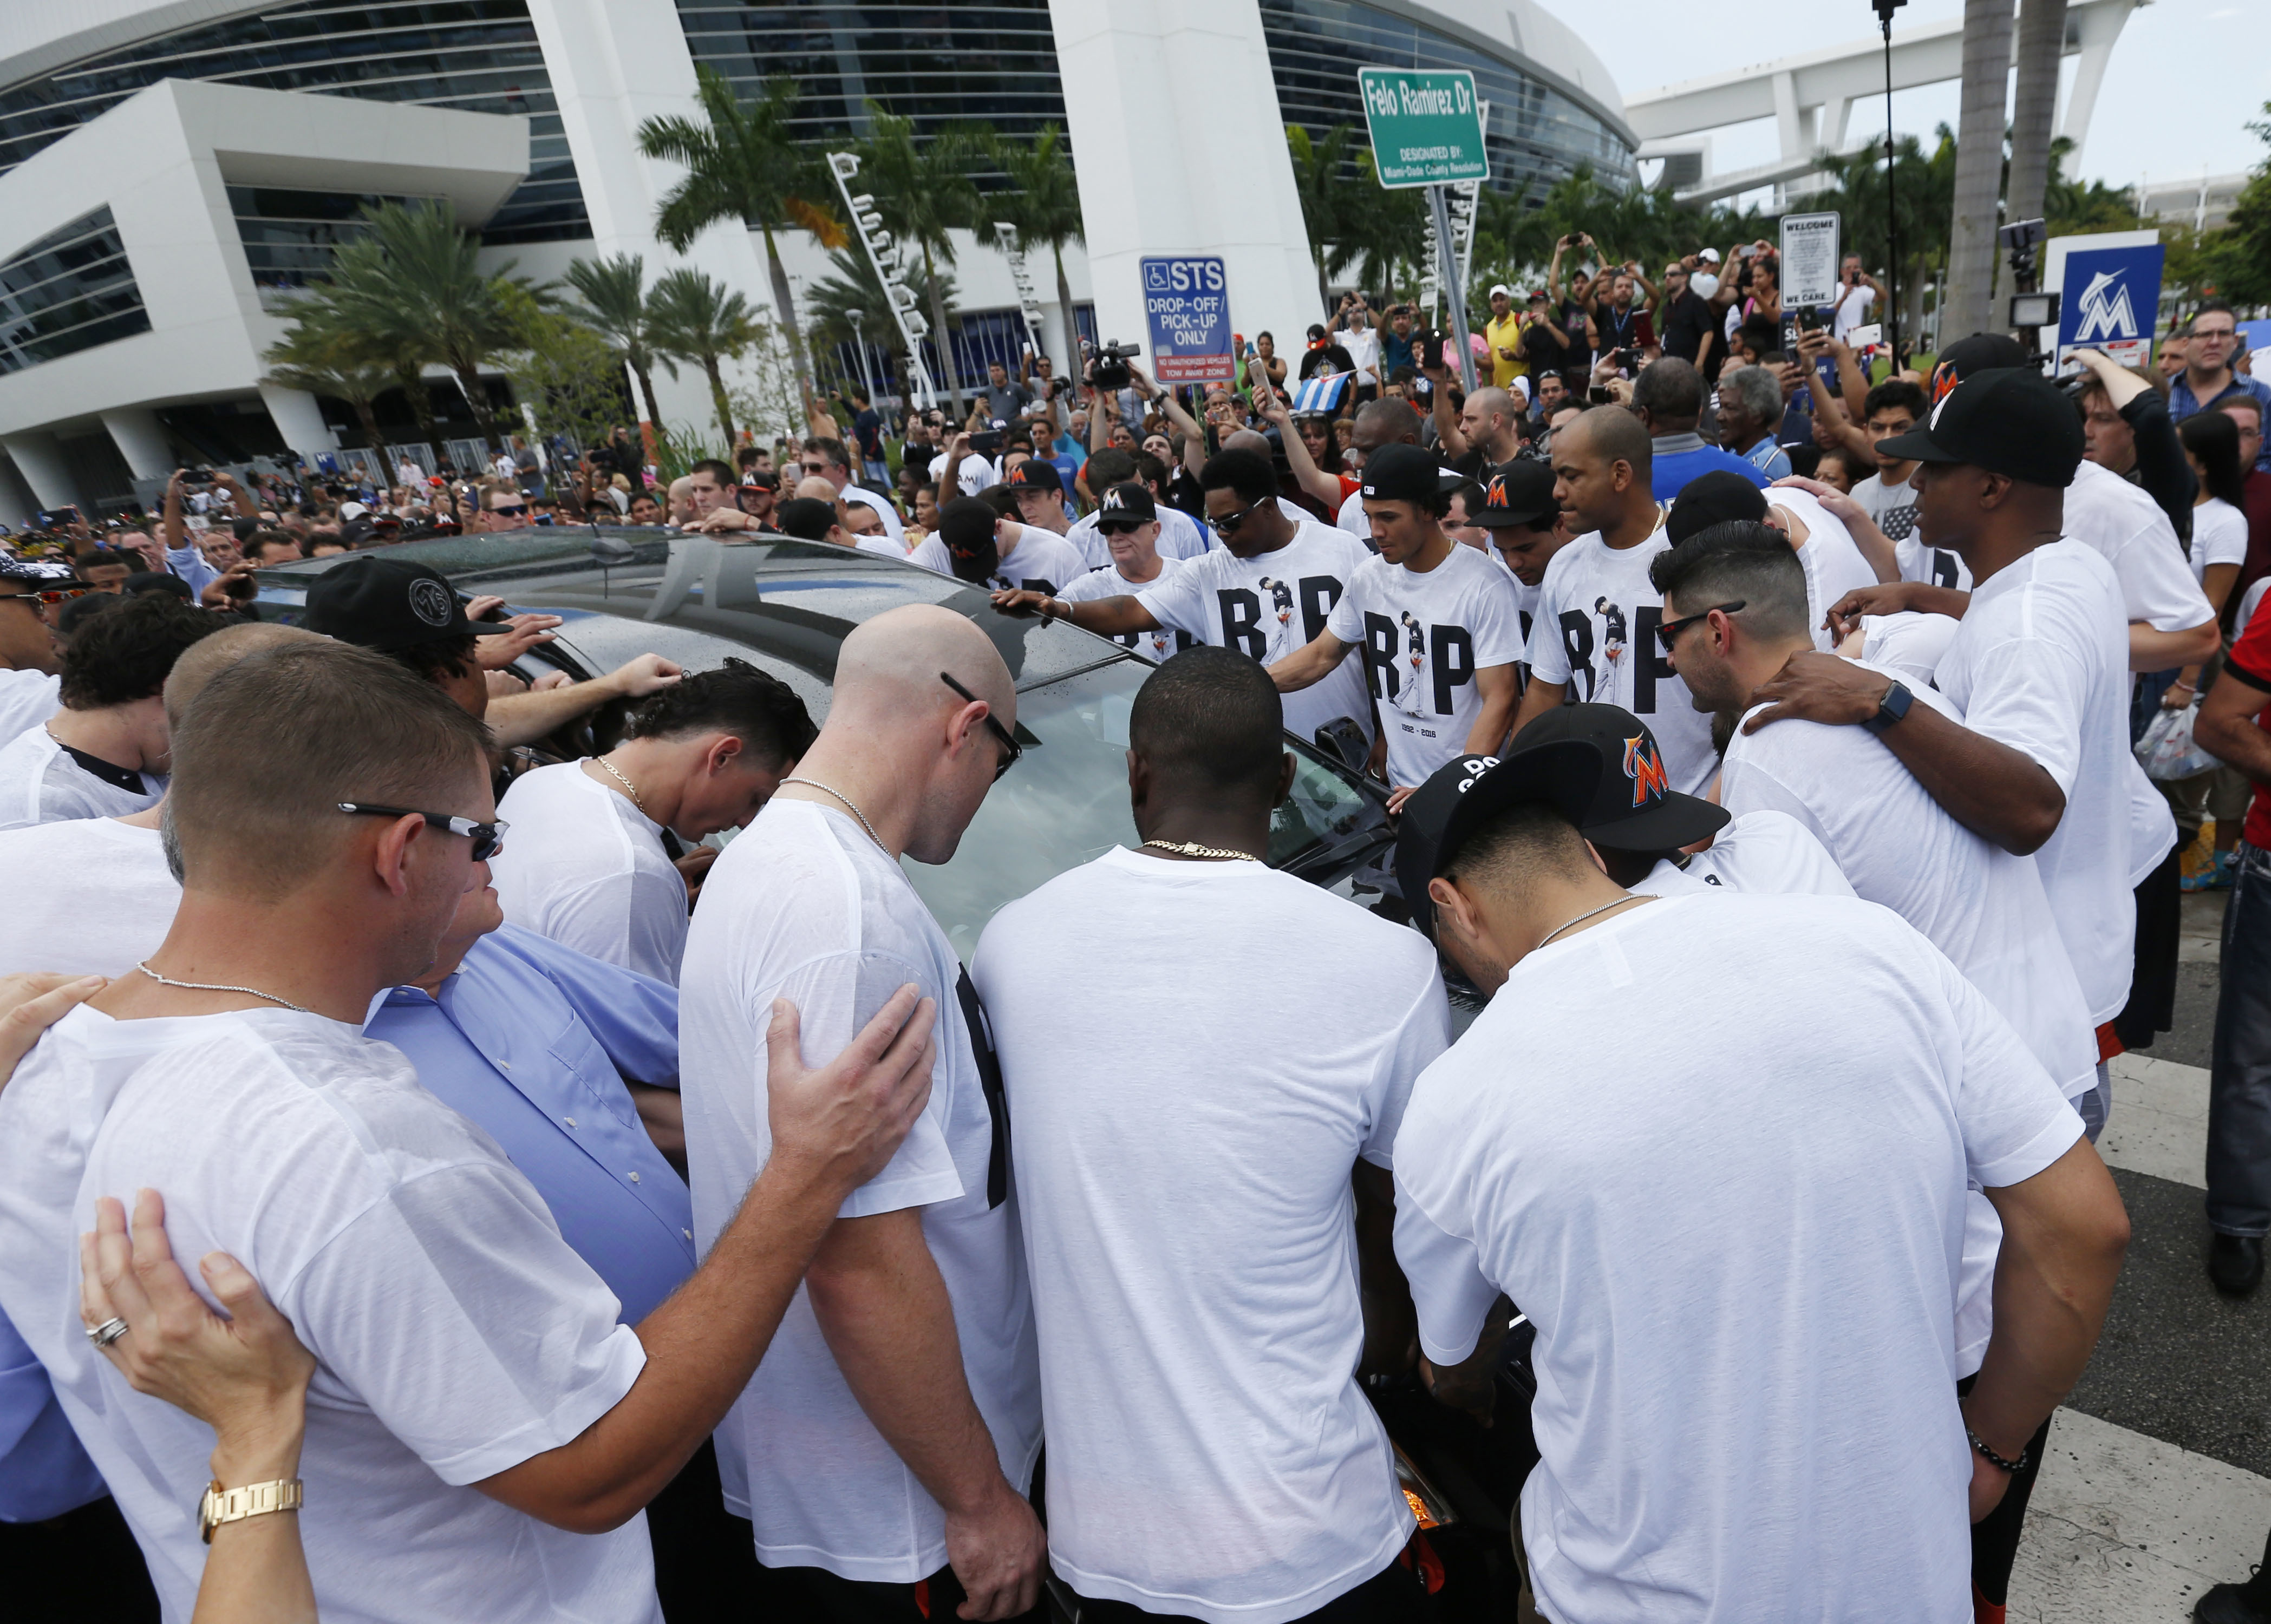 Somber Miami Marlins players and staff surround a hearse carrying the body of pitcher Jose Fernandez as it leaves Marlins Park stadium, Wednesday, Sept. 28, 2016, in Miami. AP